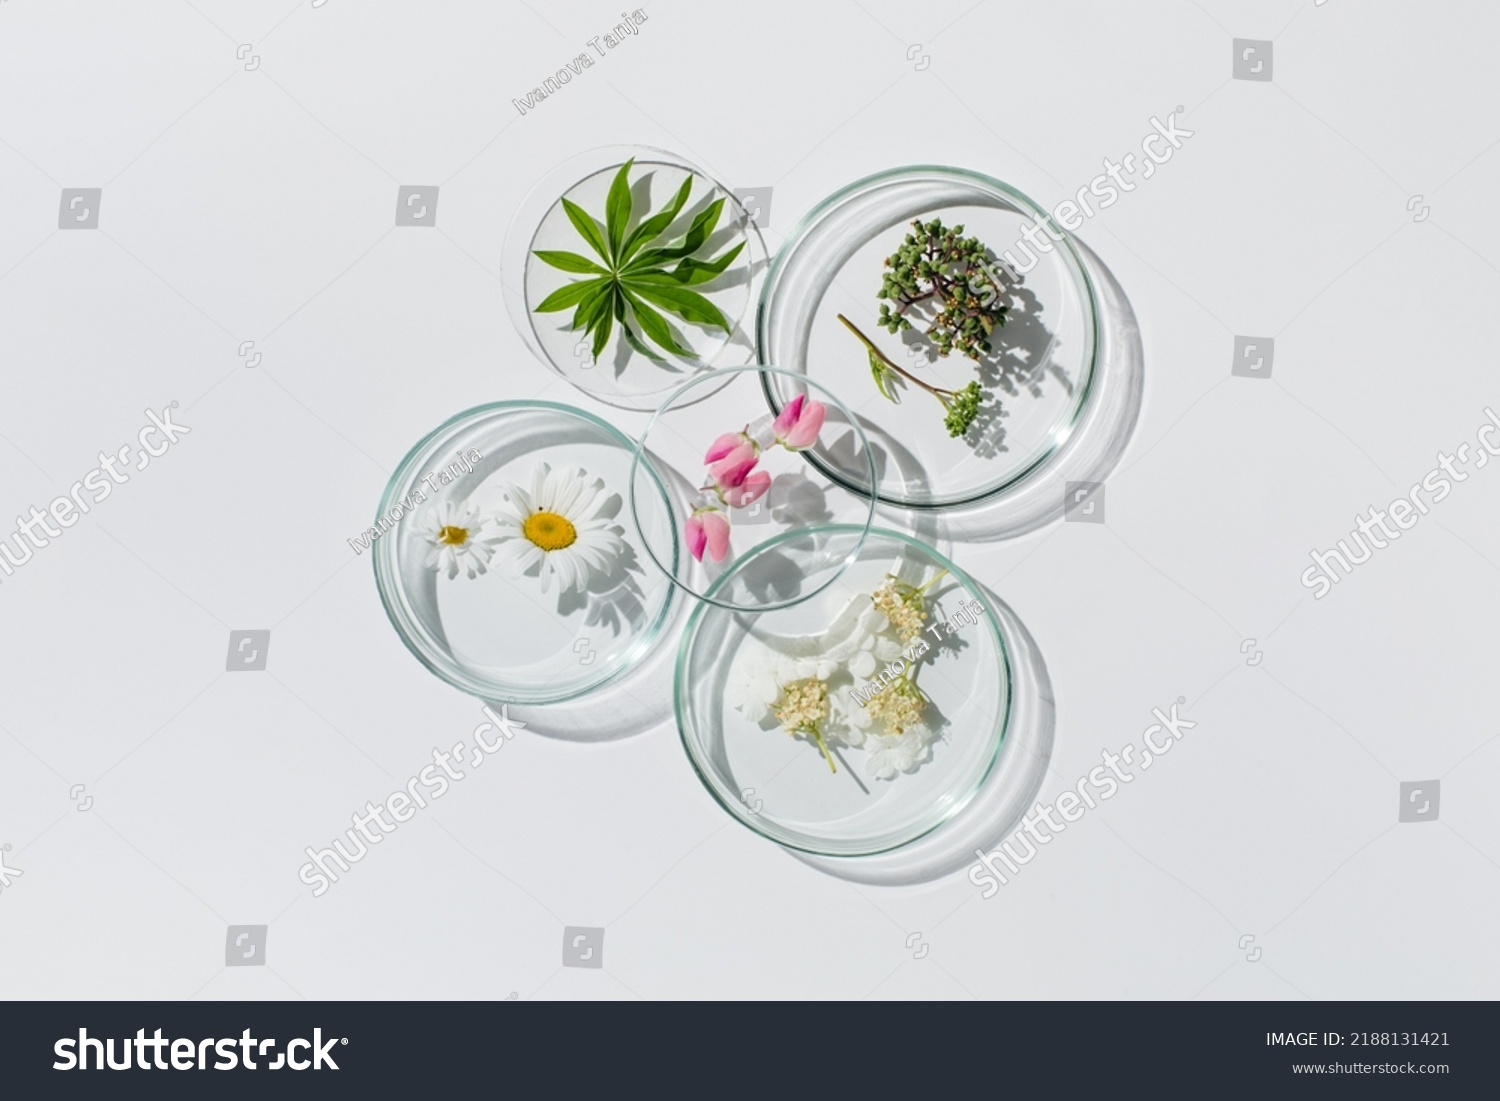 Petri dishes on white background.Natural medicine, cosmetic research, bioscience, organic skin care products. Top view, flat lay. Scientific laboratory glassware. Research and development Concept #2188131421